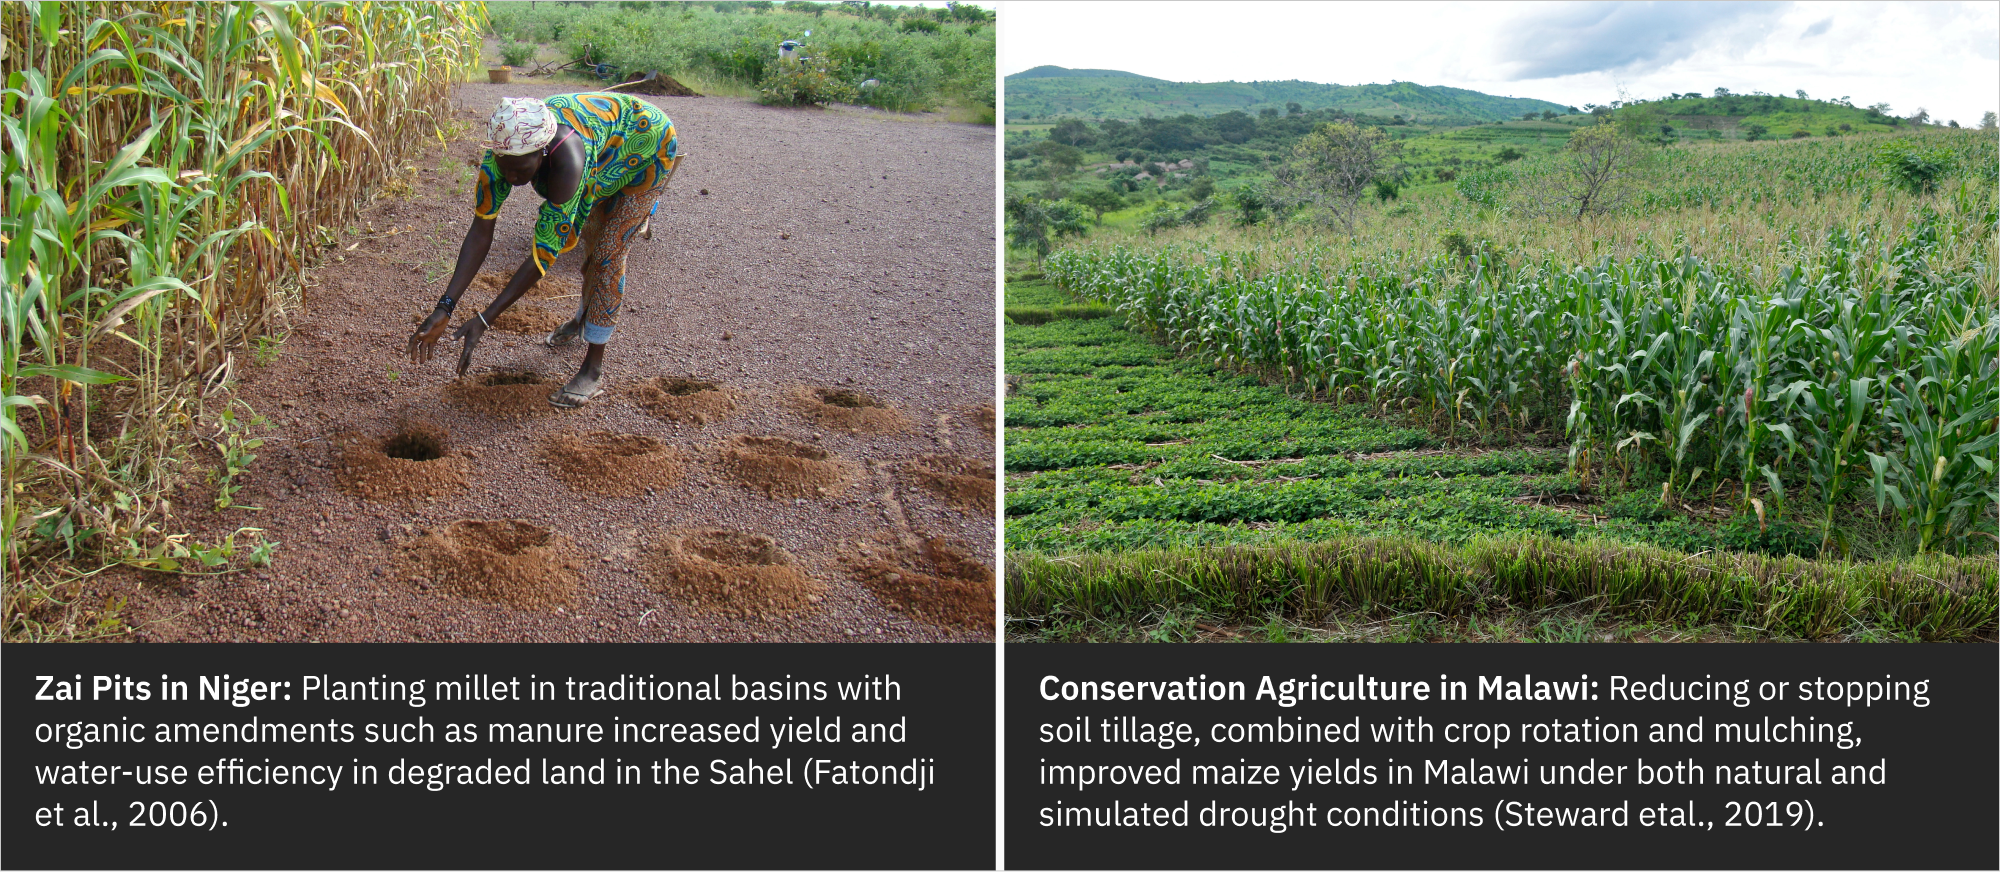 Data Insight 8, Adaptation Options 1, 2: Zia pits in Niger, Conservation Agriculture in Malawi